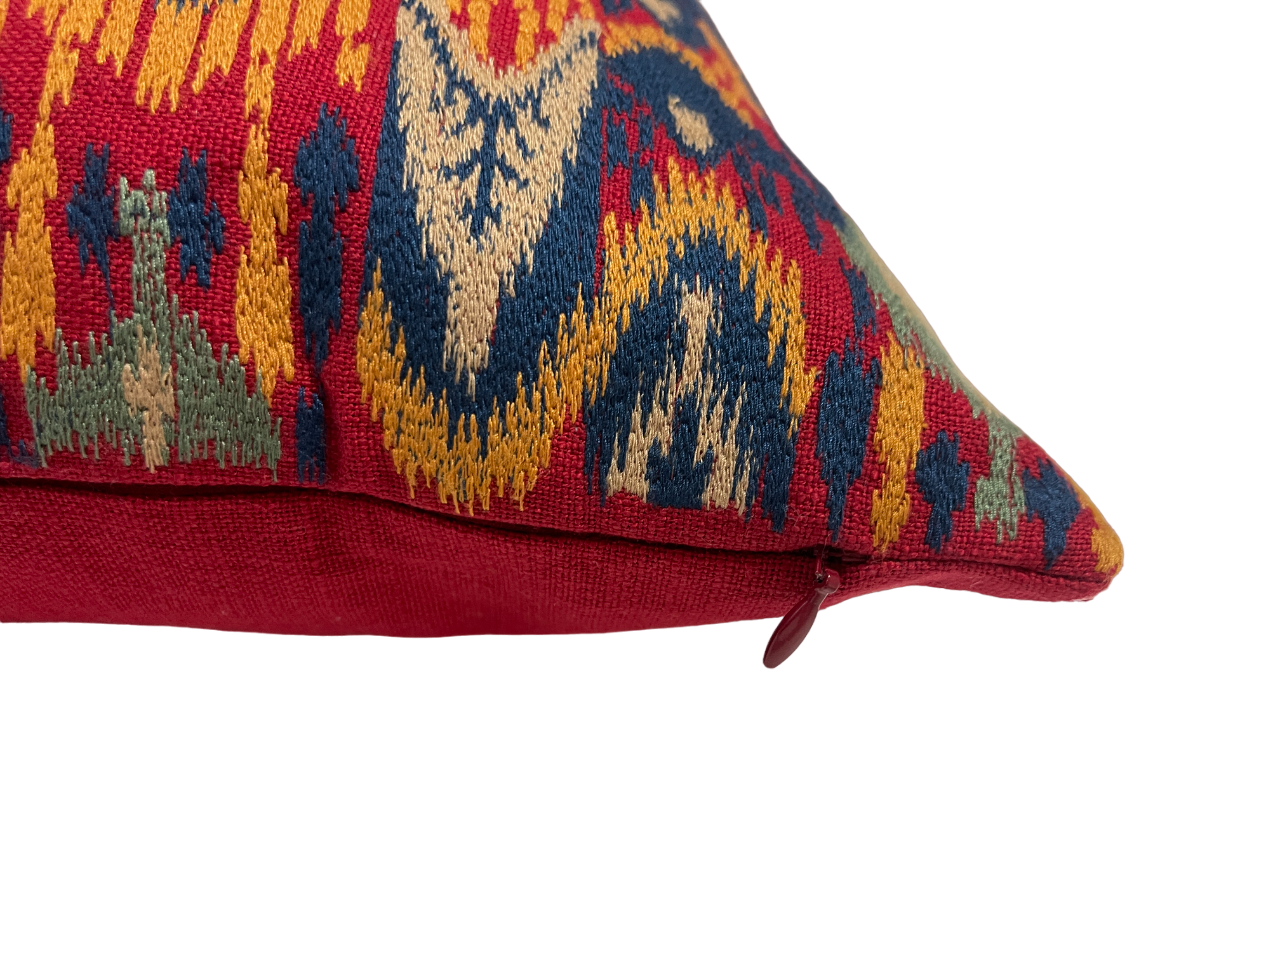 Balangir Ikat Embroidered Red Cushion Cover